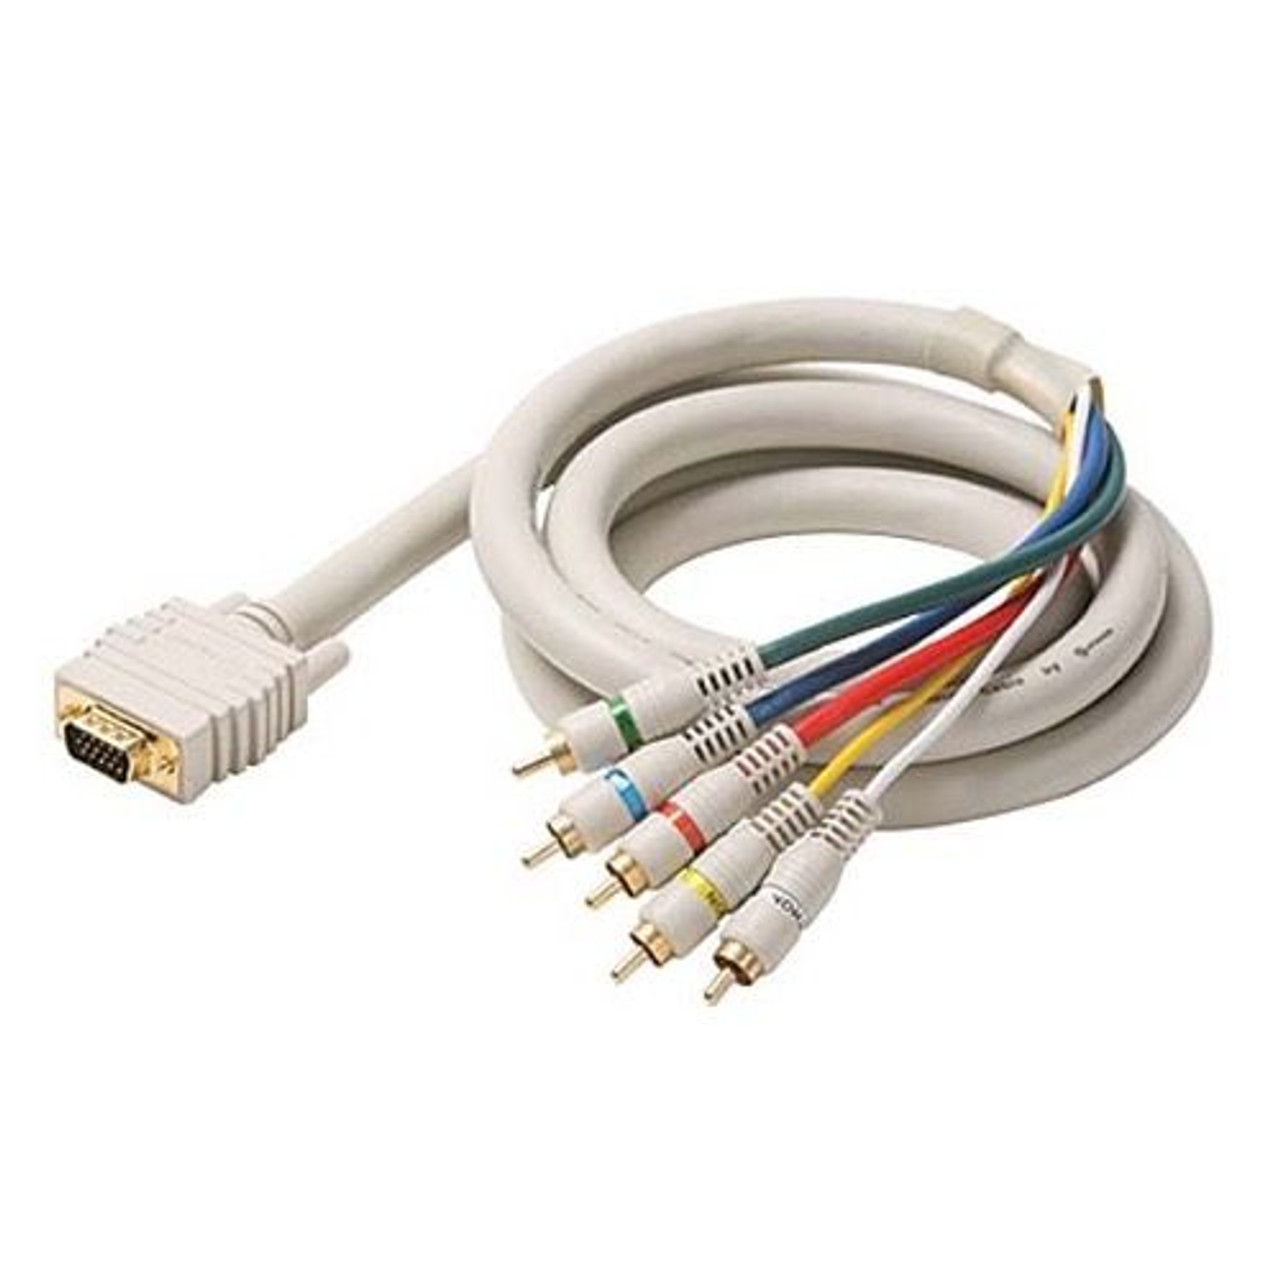 Eagle 6' FT SVGA 5 RCA Male Component Cable HD-15 Python HDTV Cable Component RGBYW Video Audio Cable Stereo 5-RCA Male to SVGA Ivory 24 K Gold Plate Color Coded Double Shielded Digital Signal Jumper